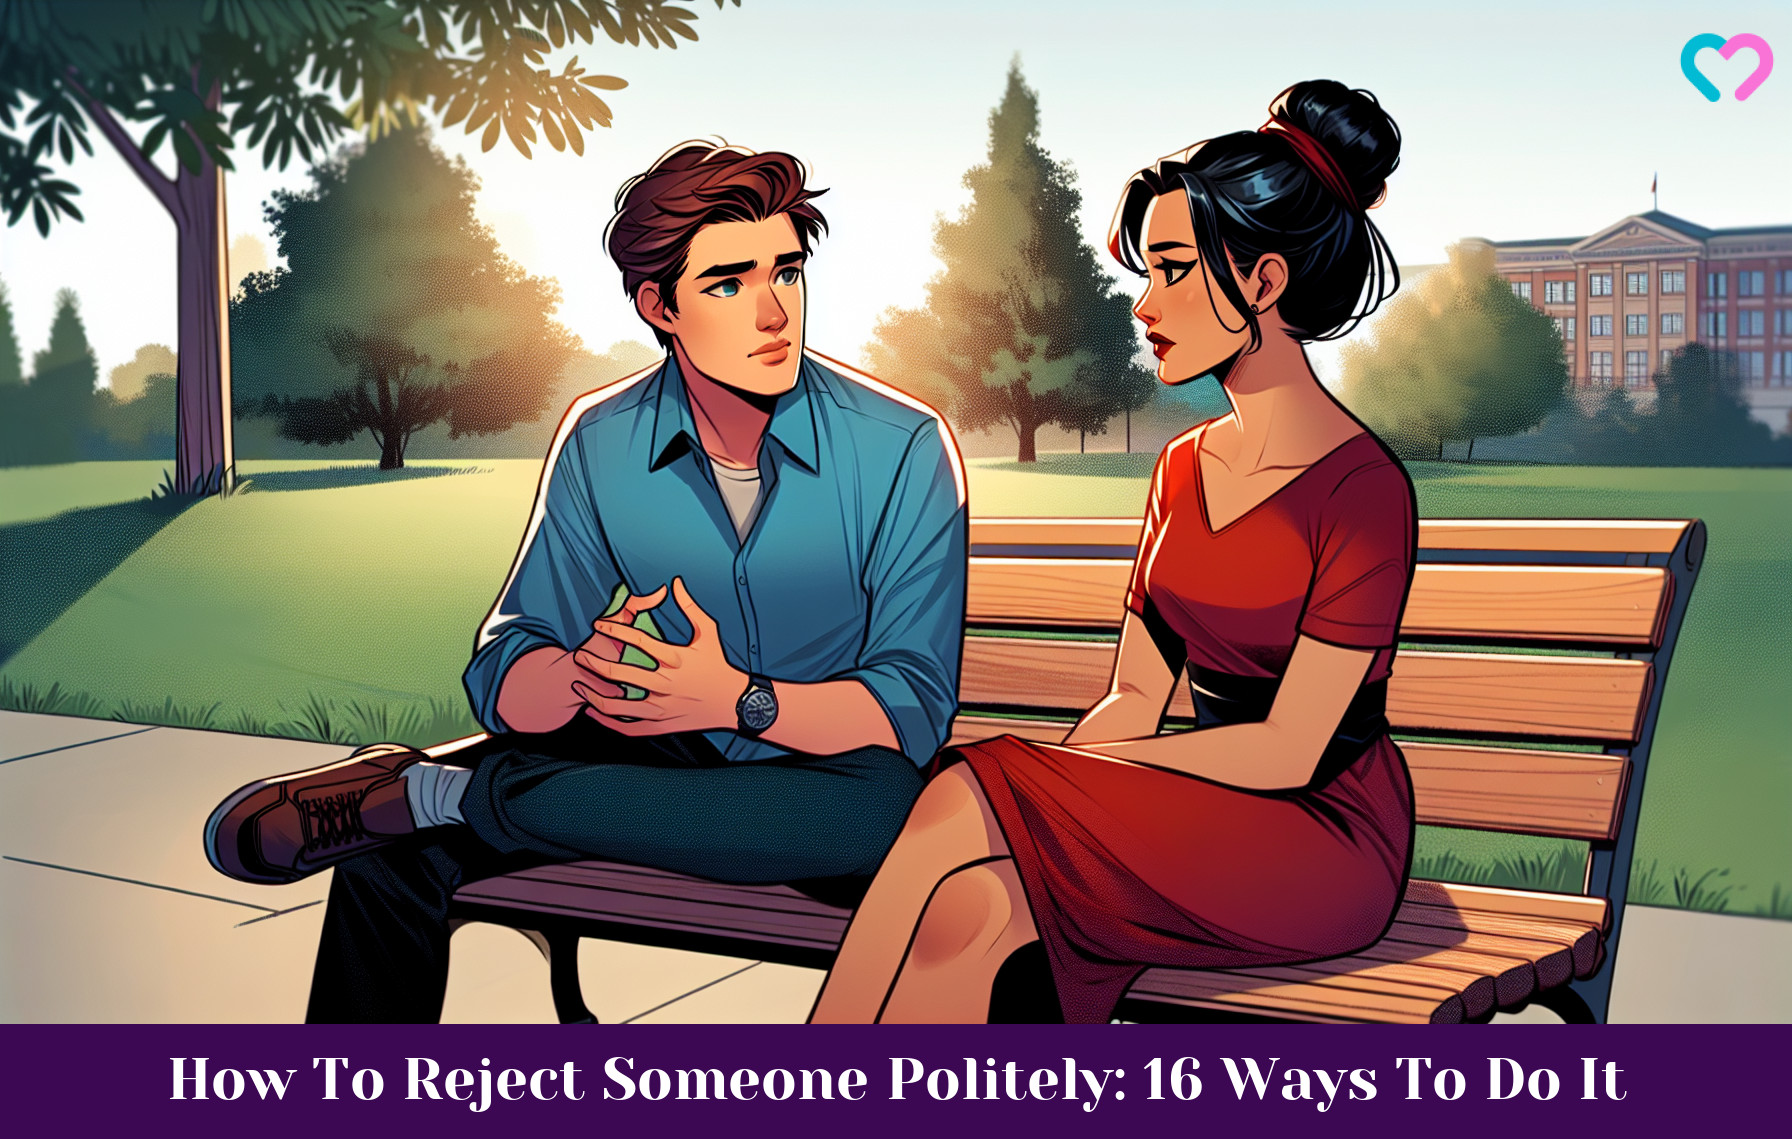 How To Reject Someone Politely: 16 Ways To Do It_illustration